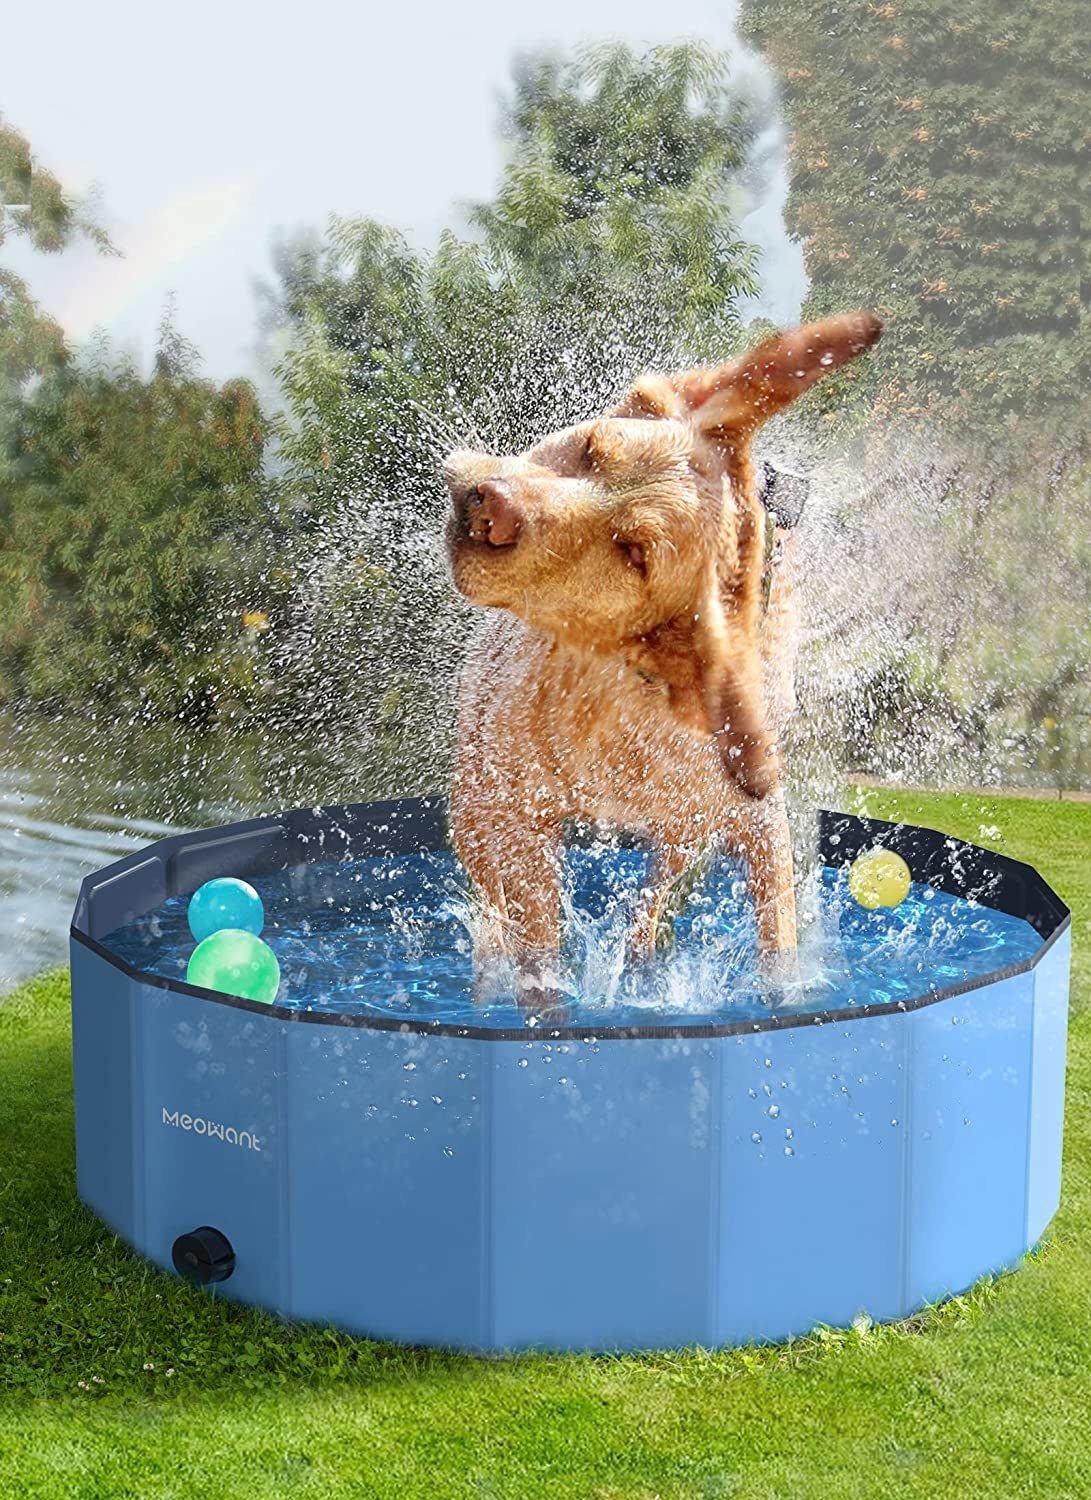 A dog shaking water off while standing in the mini pool